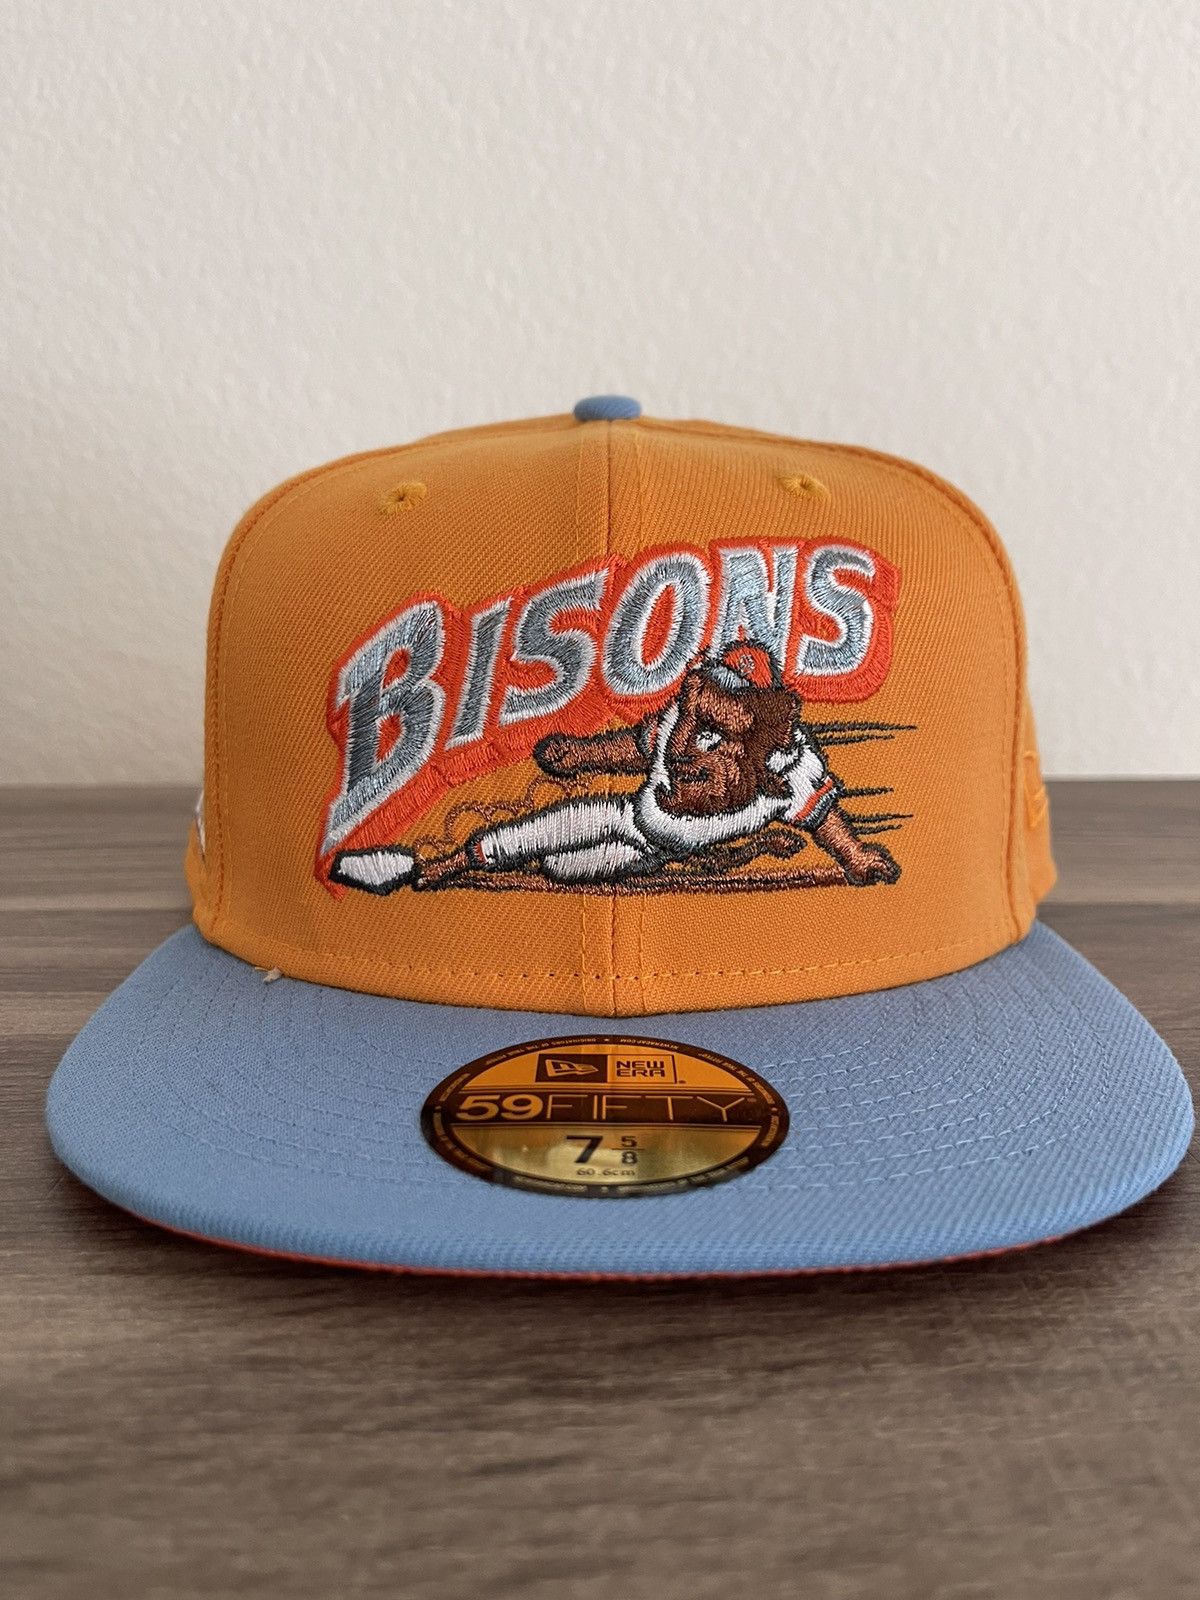 New Era Topperz Buffalo Bisons Iced Orange Edition - Size 7 5/8 Size ONE SIZE - 1 Preview